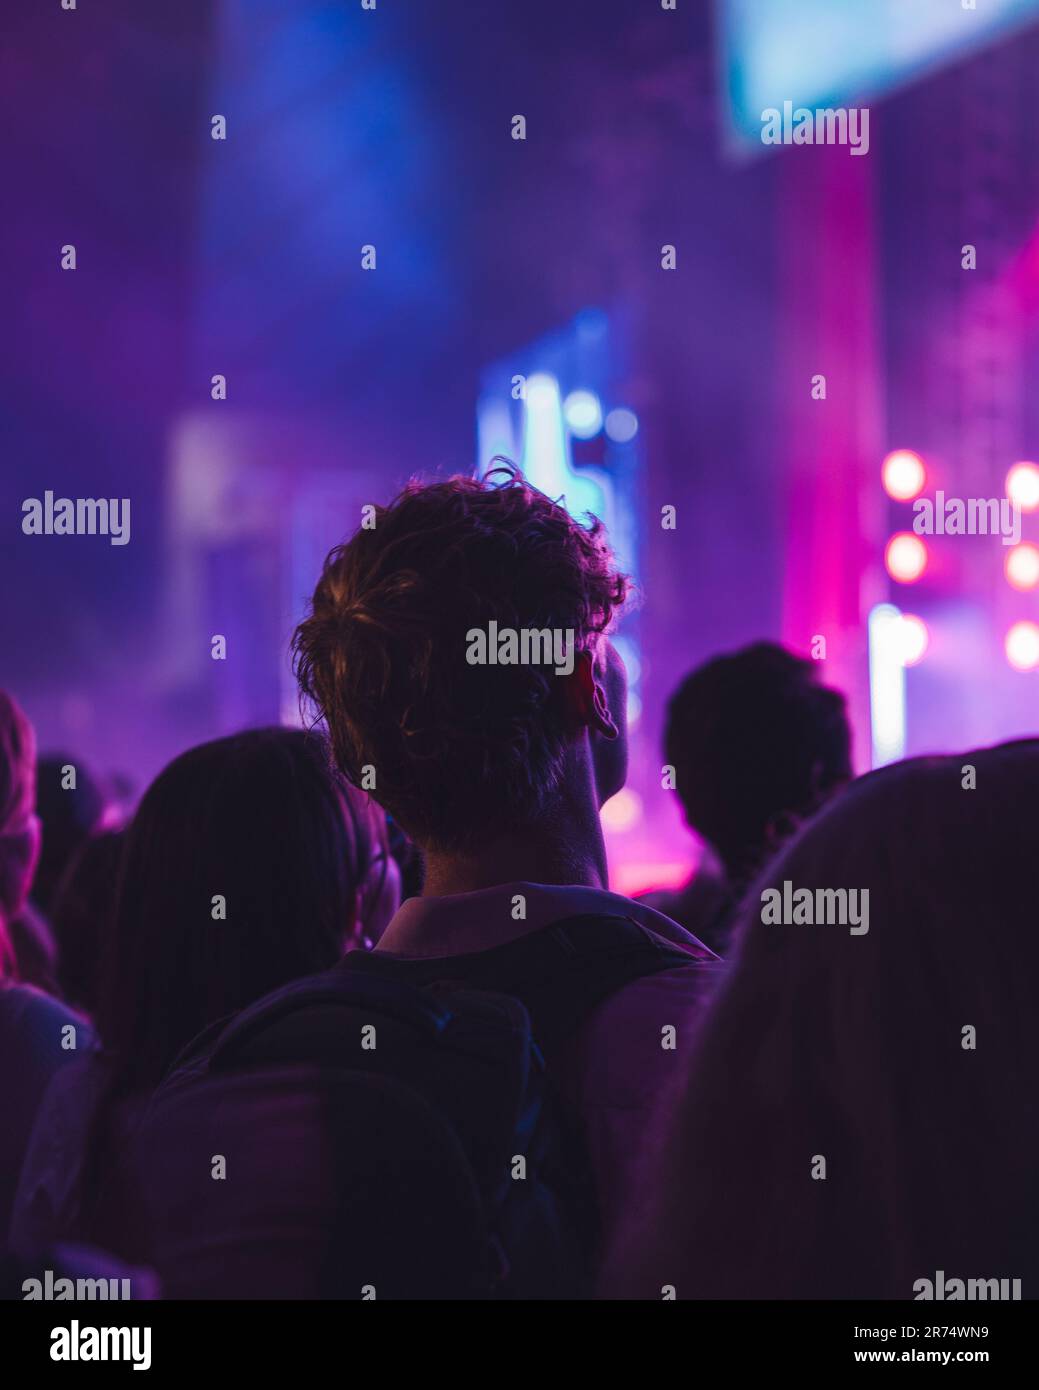 A crowd of people watching a band perform on stage in front of them. Stock Photo